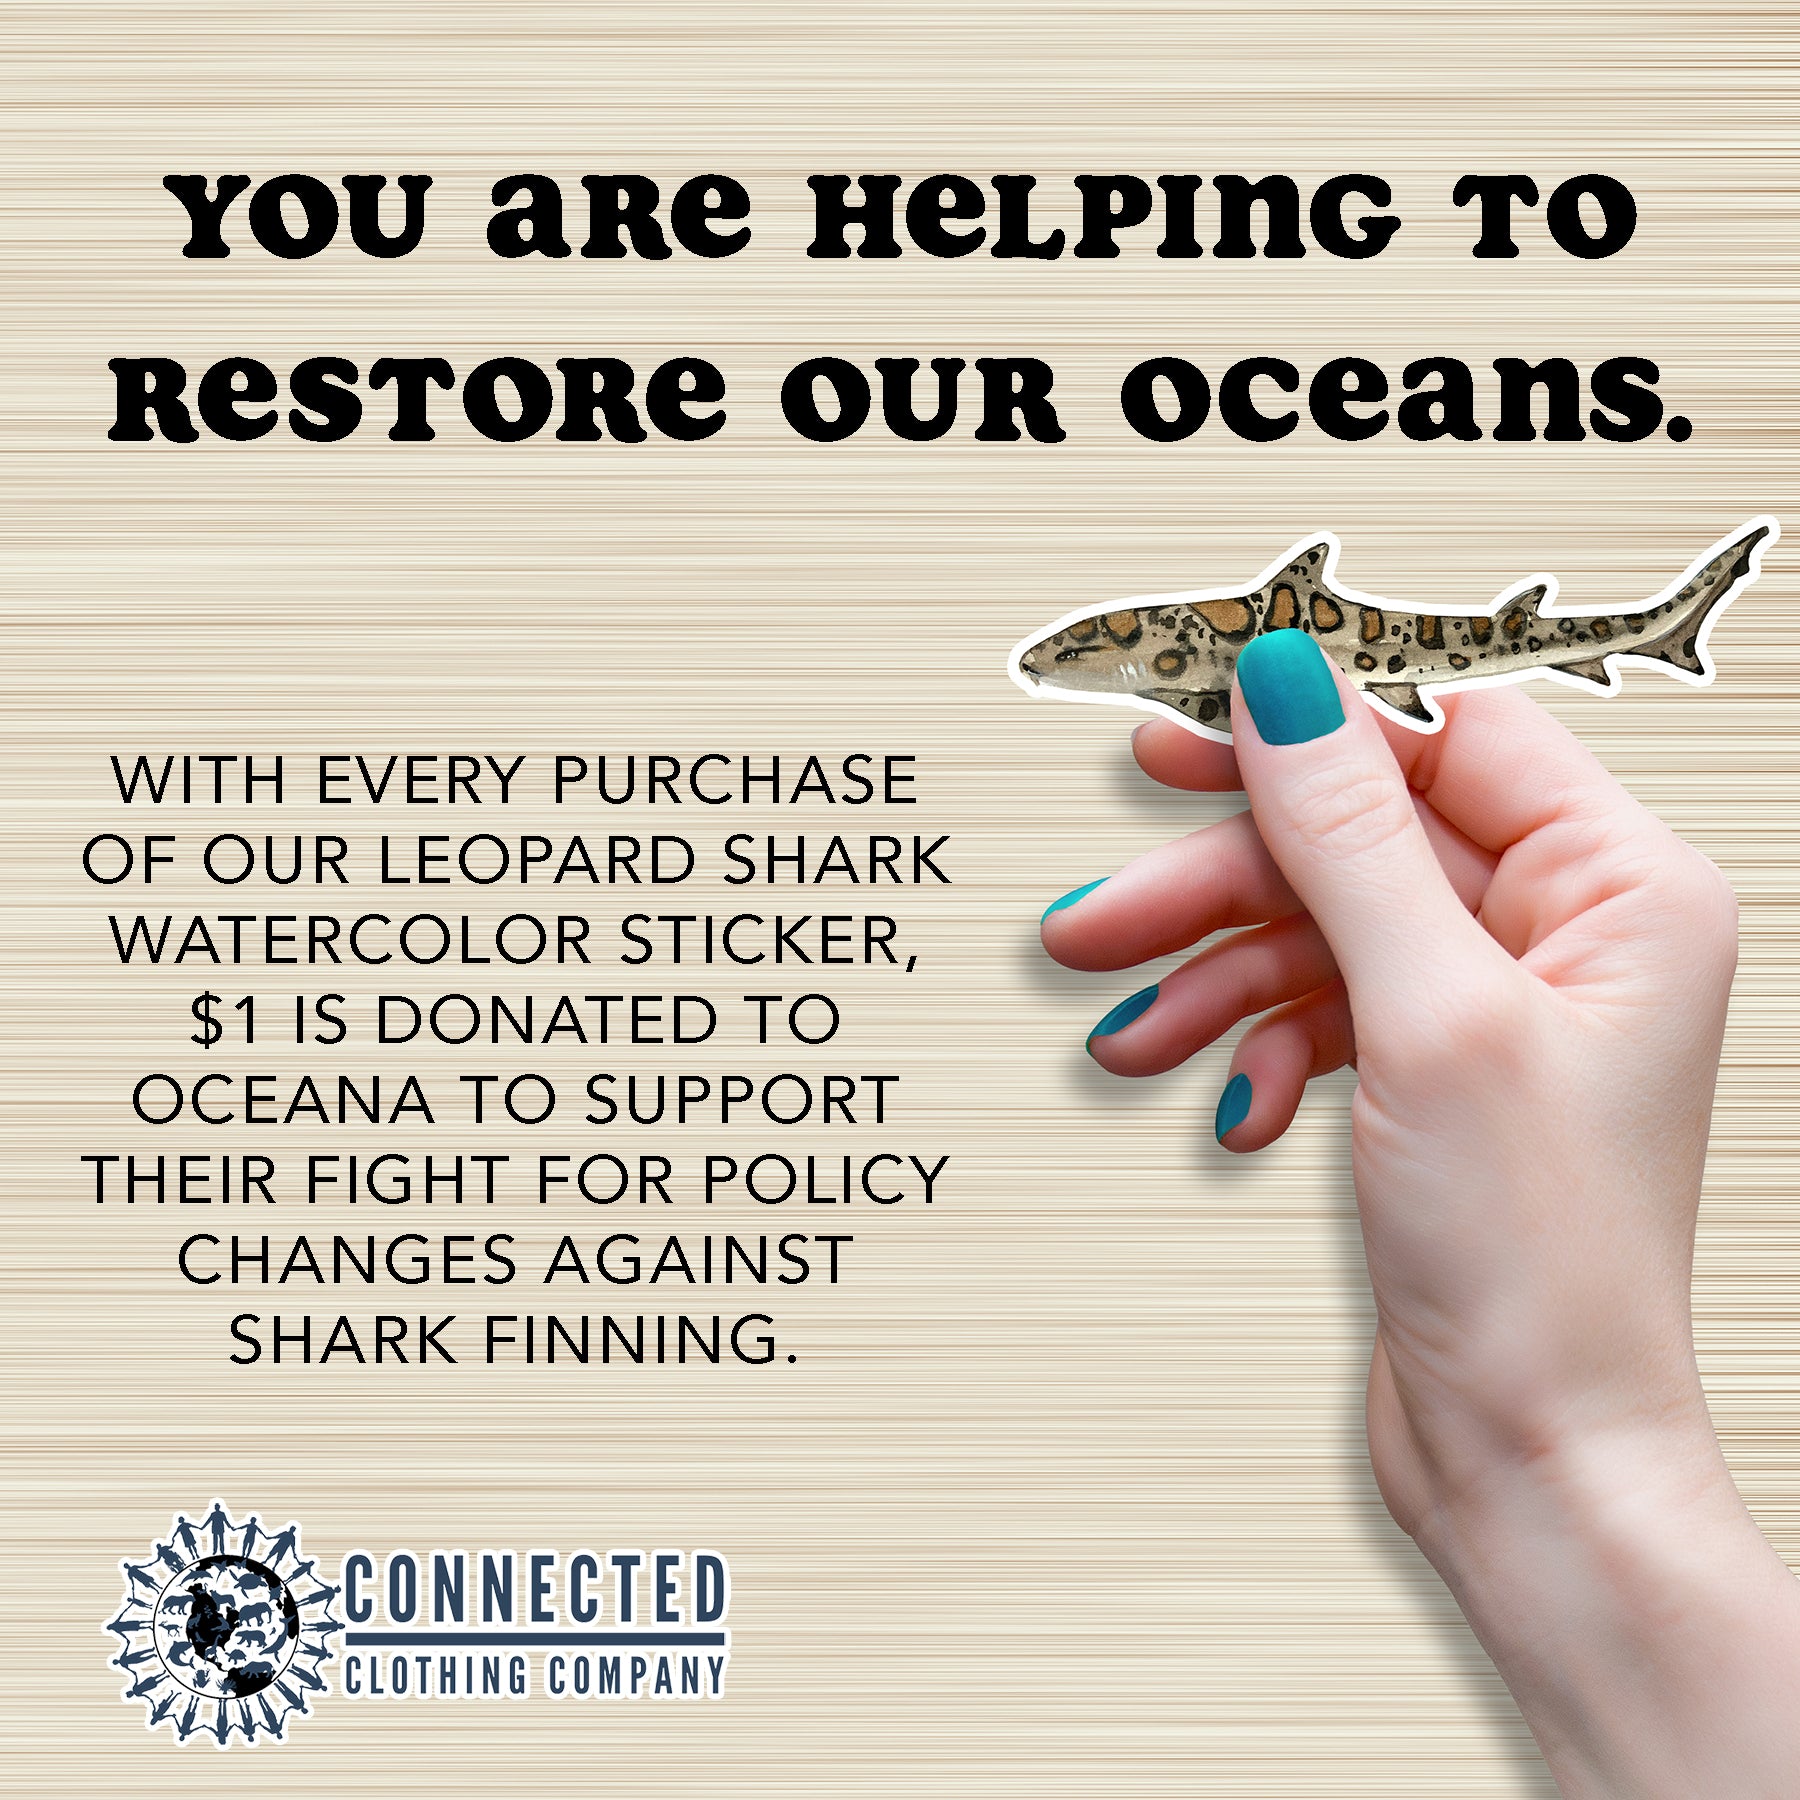 Hand Holding Leopard Shark Watercolor Sticker - "You are helping to restore our oceans. With every purchase of our leopard shark watercolor sticker, $1 is donated to oceana to support their fight for policy changes against shark finning." - sweetsherriloudesigns - Ethical and Sustainable Apparel - portion of profits donated to shark conservation